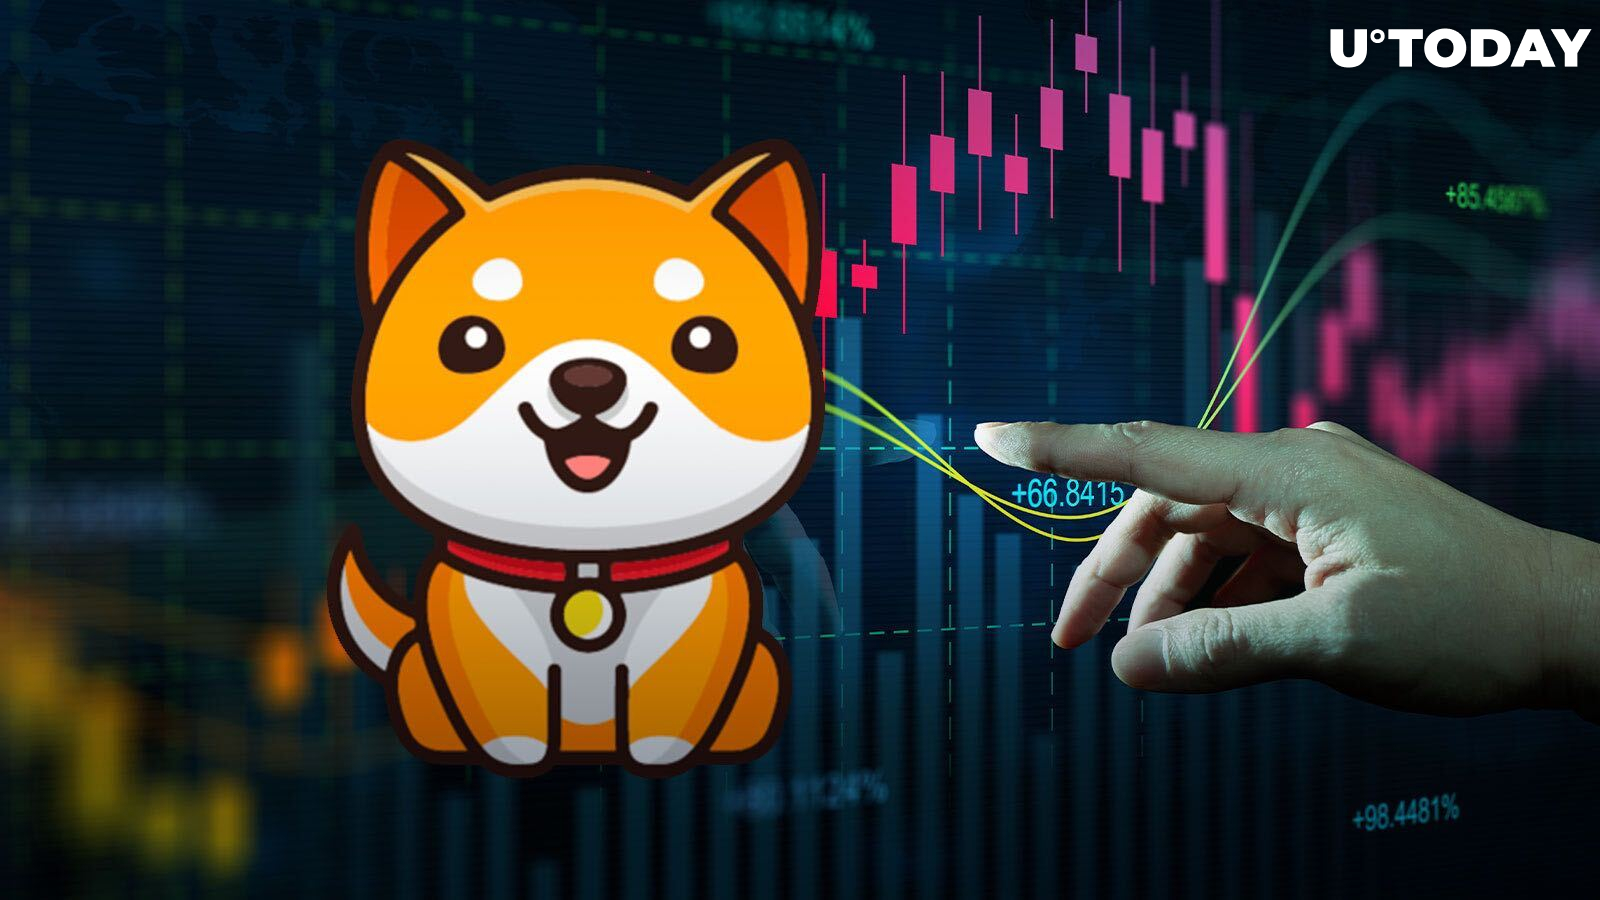 BabyDoge Spikes up 20% Amid Potential Major Crypto Exchange Listing